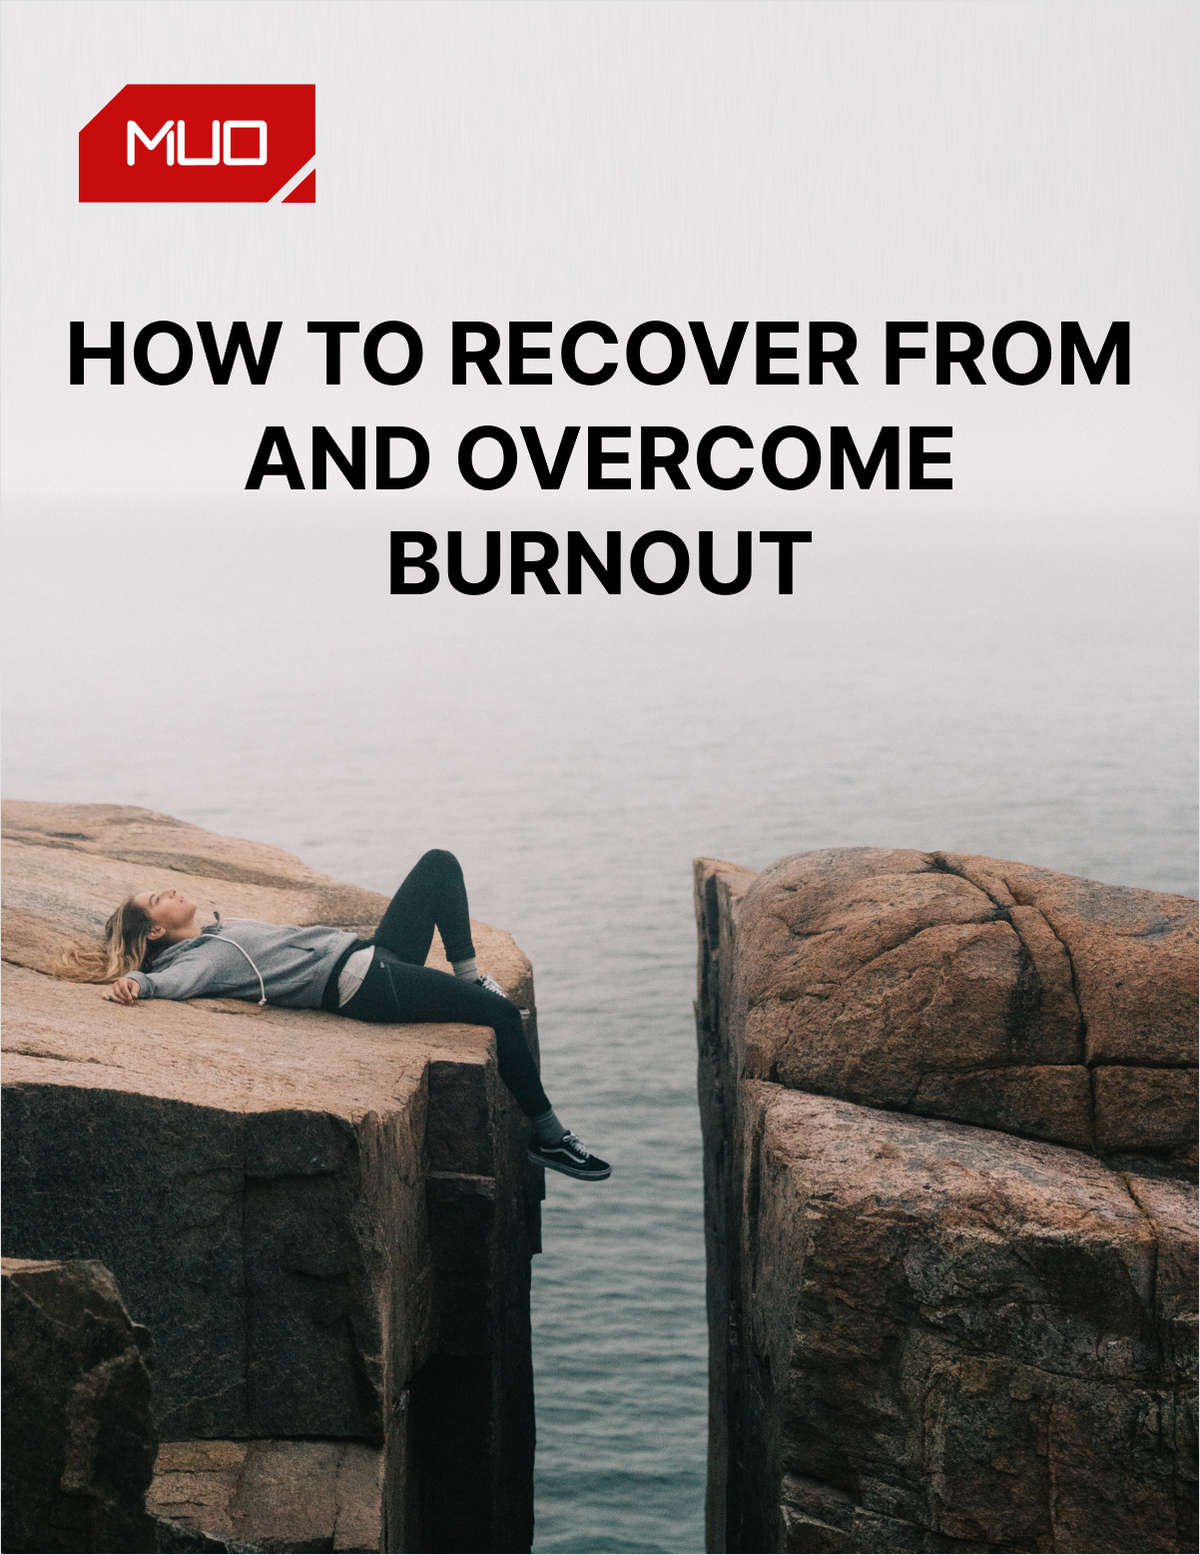 50 Tips on How to Overcome and Recover From Burnout